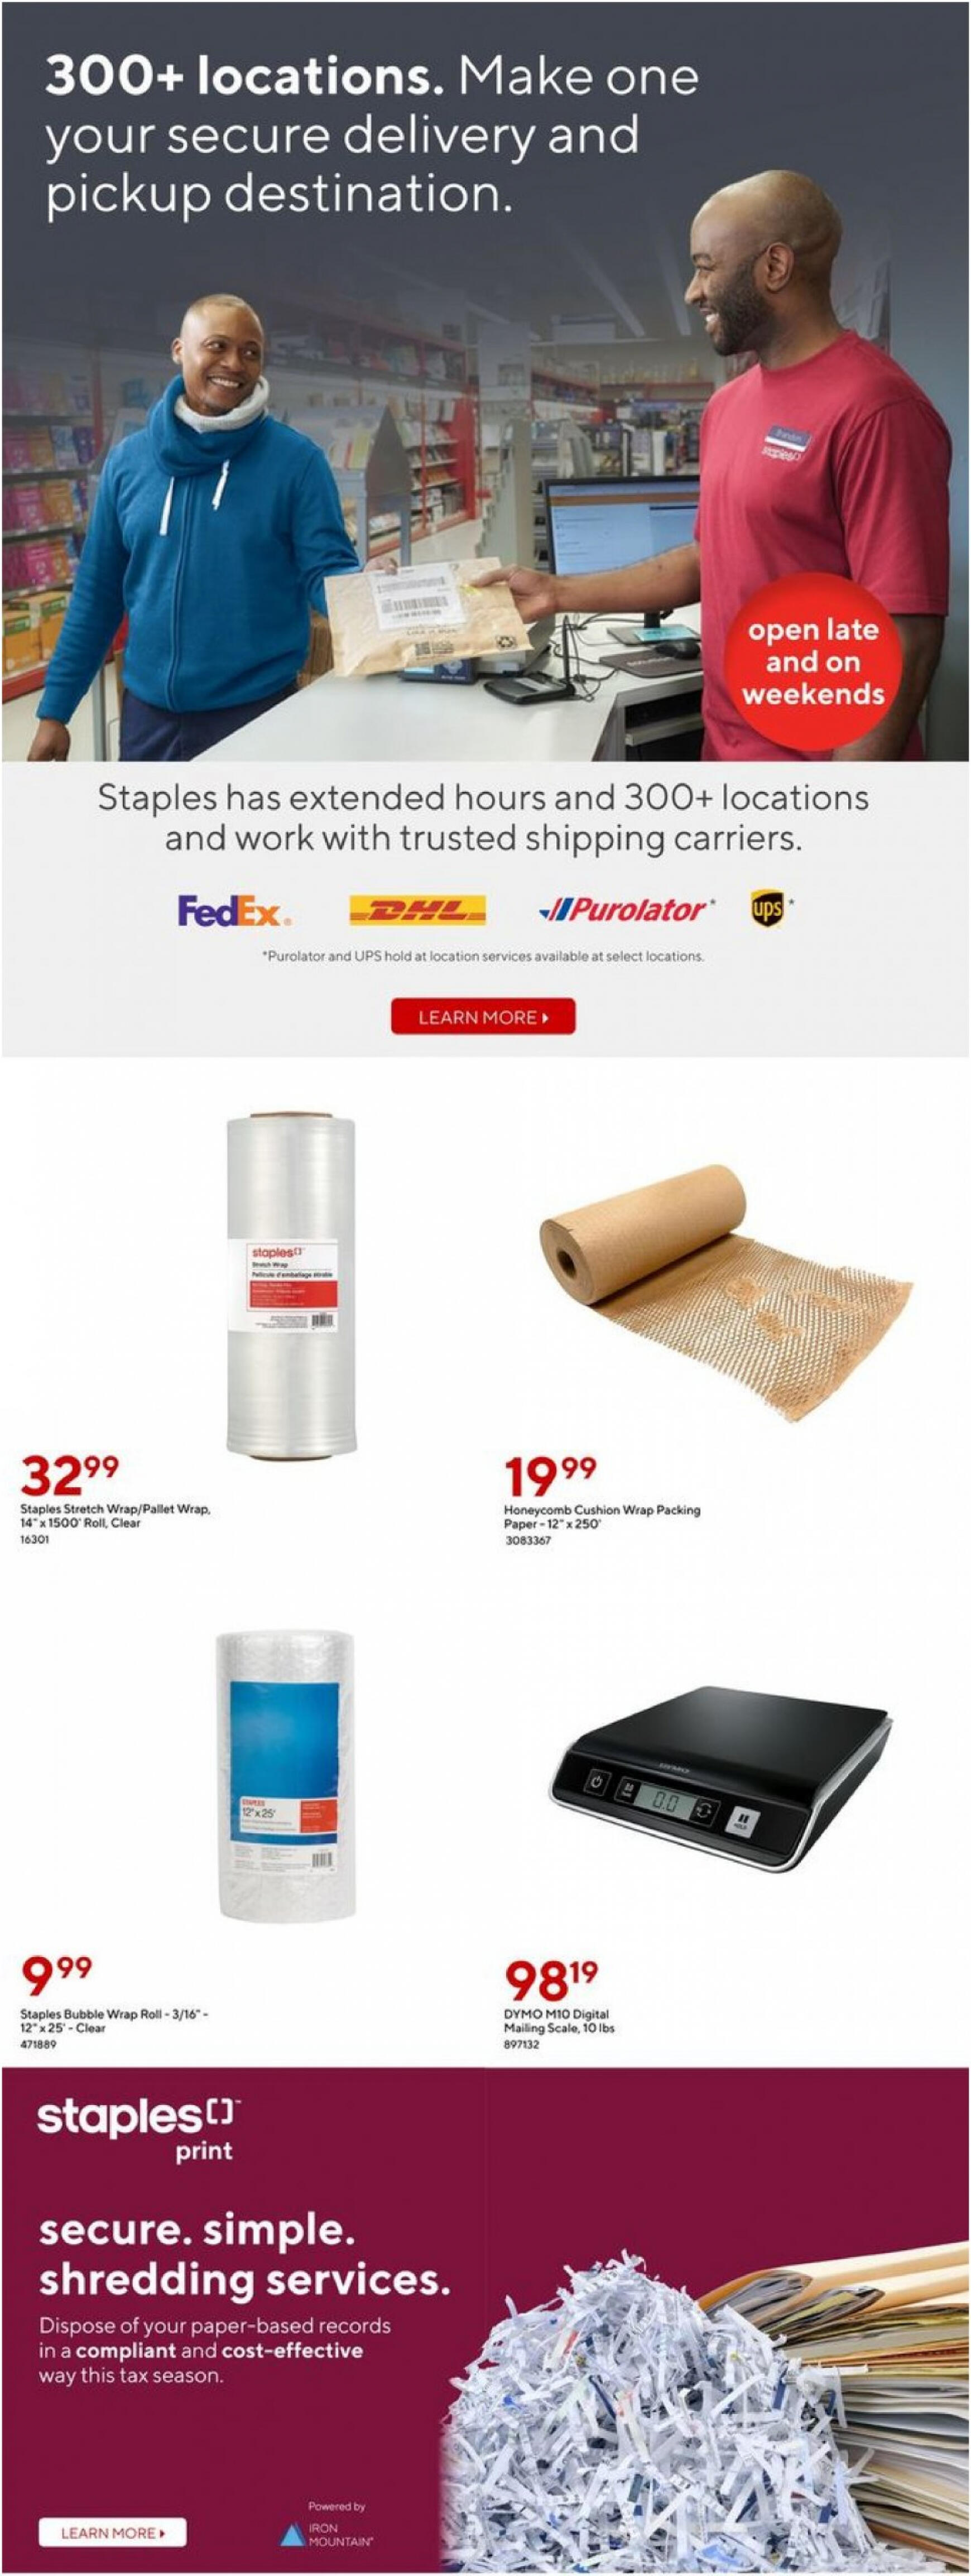 staples - Staples - Weekly flyer current 10.04. - 17.04. - page: 14